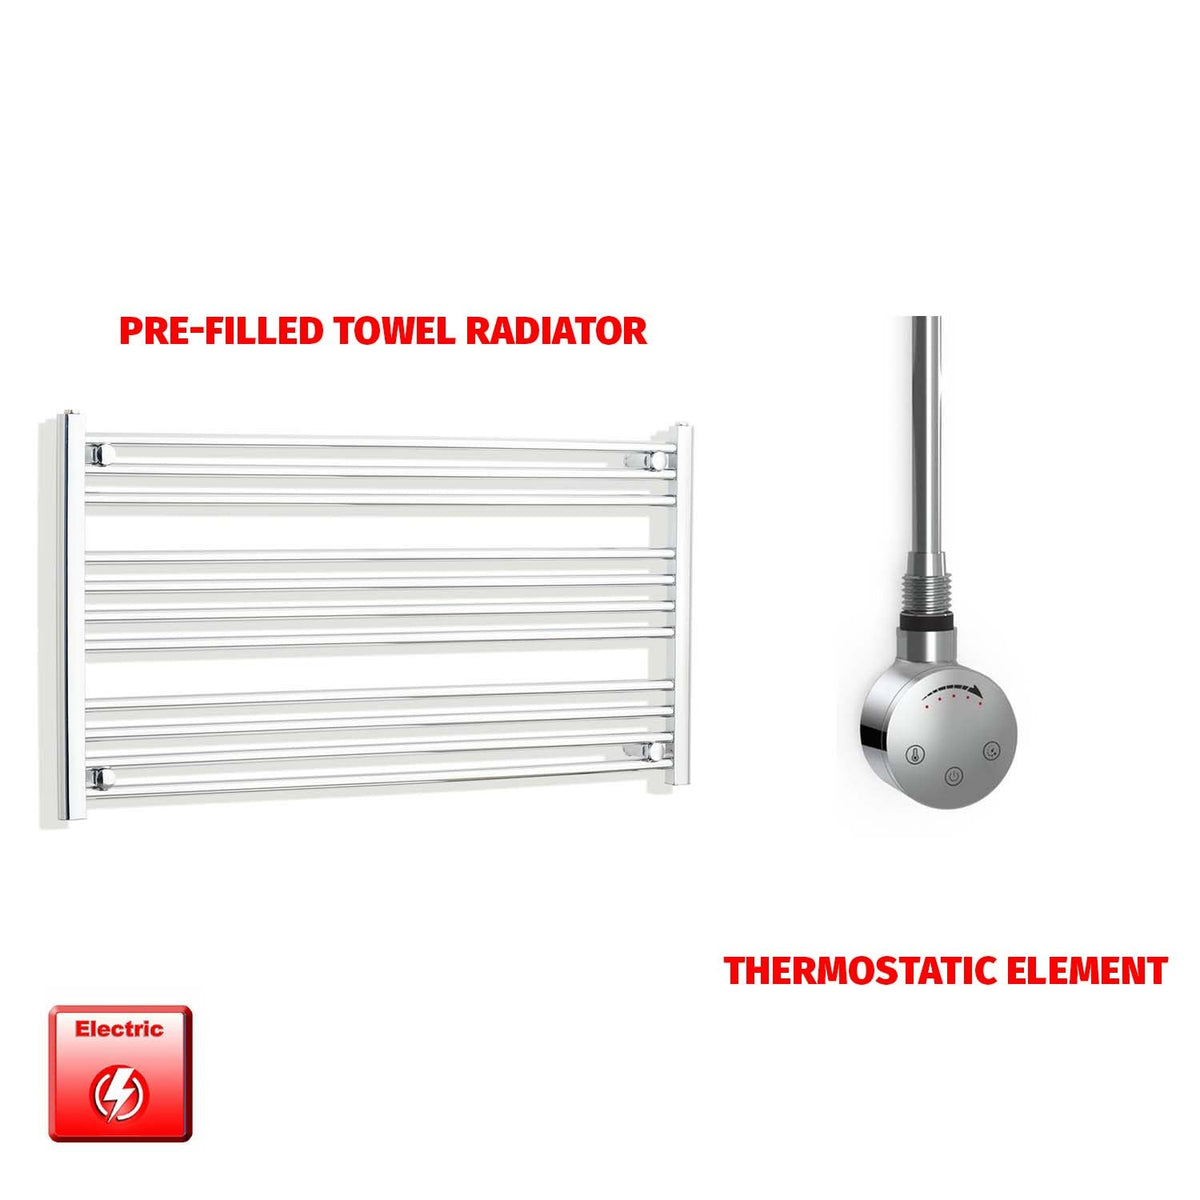 600mm High 1300mm Wide Pre-Filled Electric Heated Towel Radiator Straight Chrome SMR Thermostatic element no timer